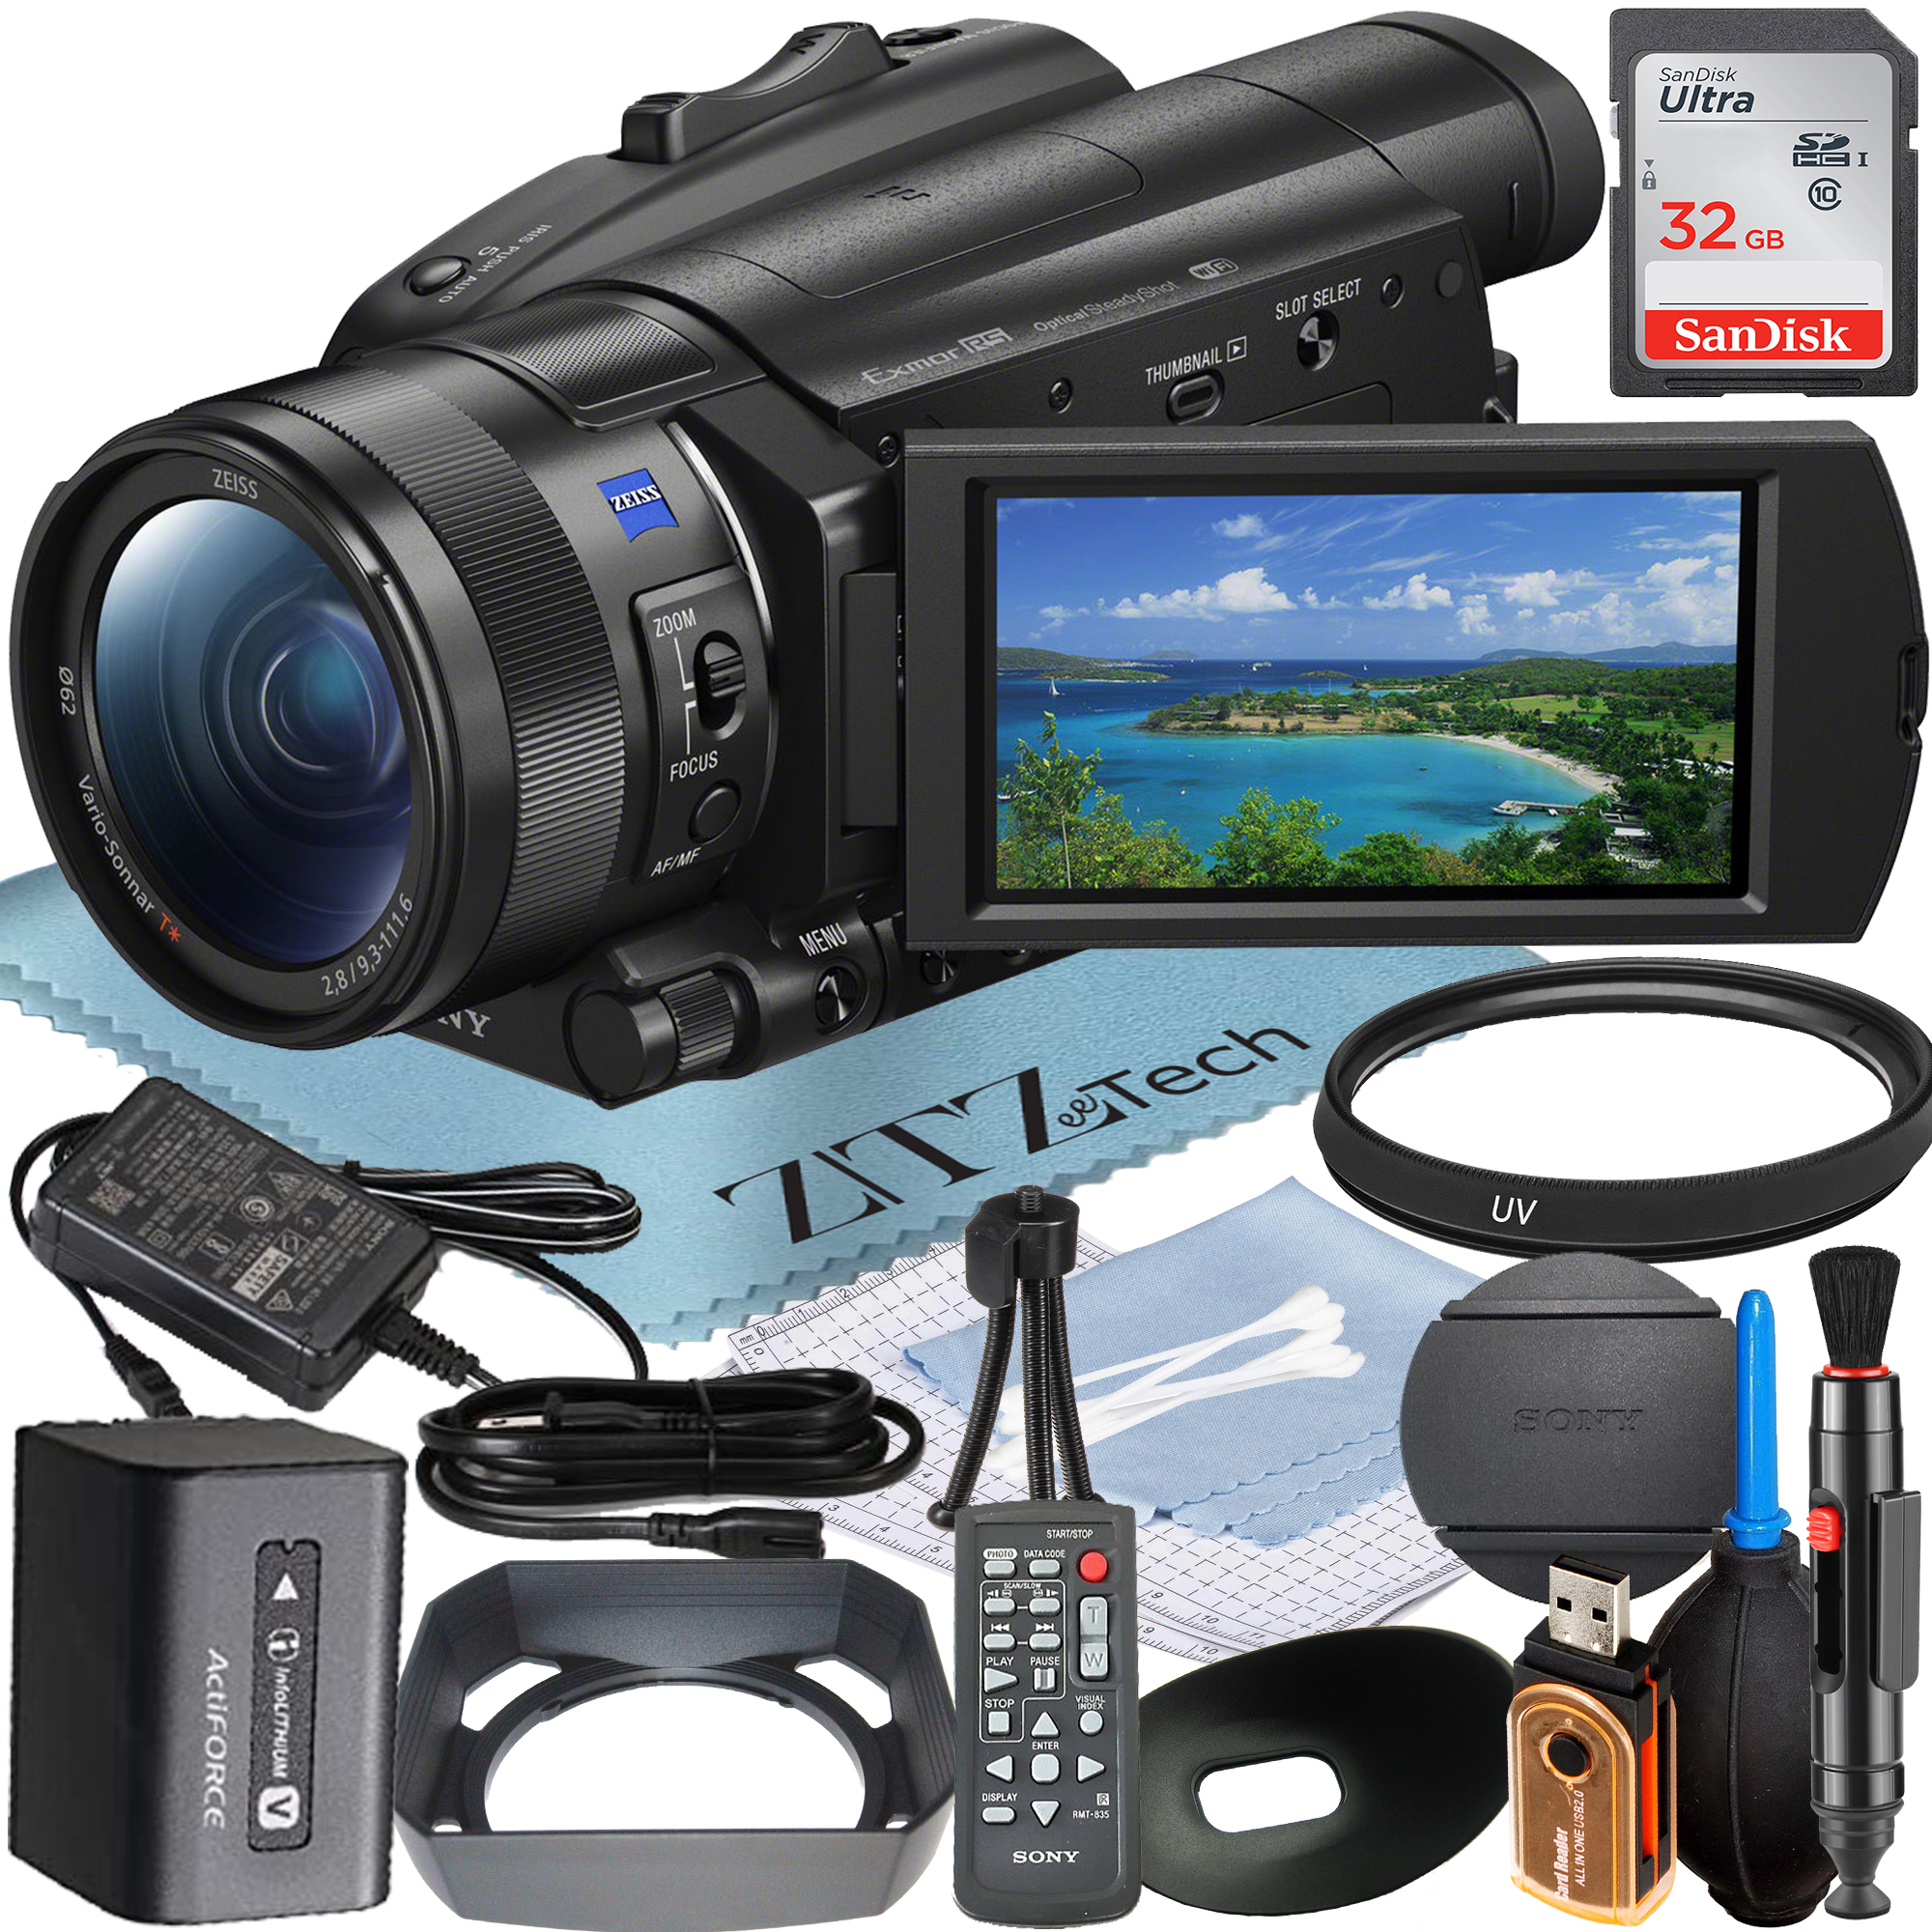 Sony FDR-AX700 4K HDR Camcorder with 32GB SanDisk Memory Card + UV Filter + ZeeTech Accessory Bundle